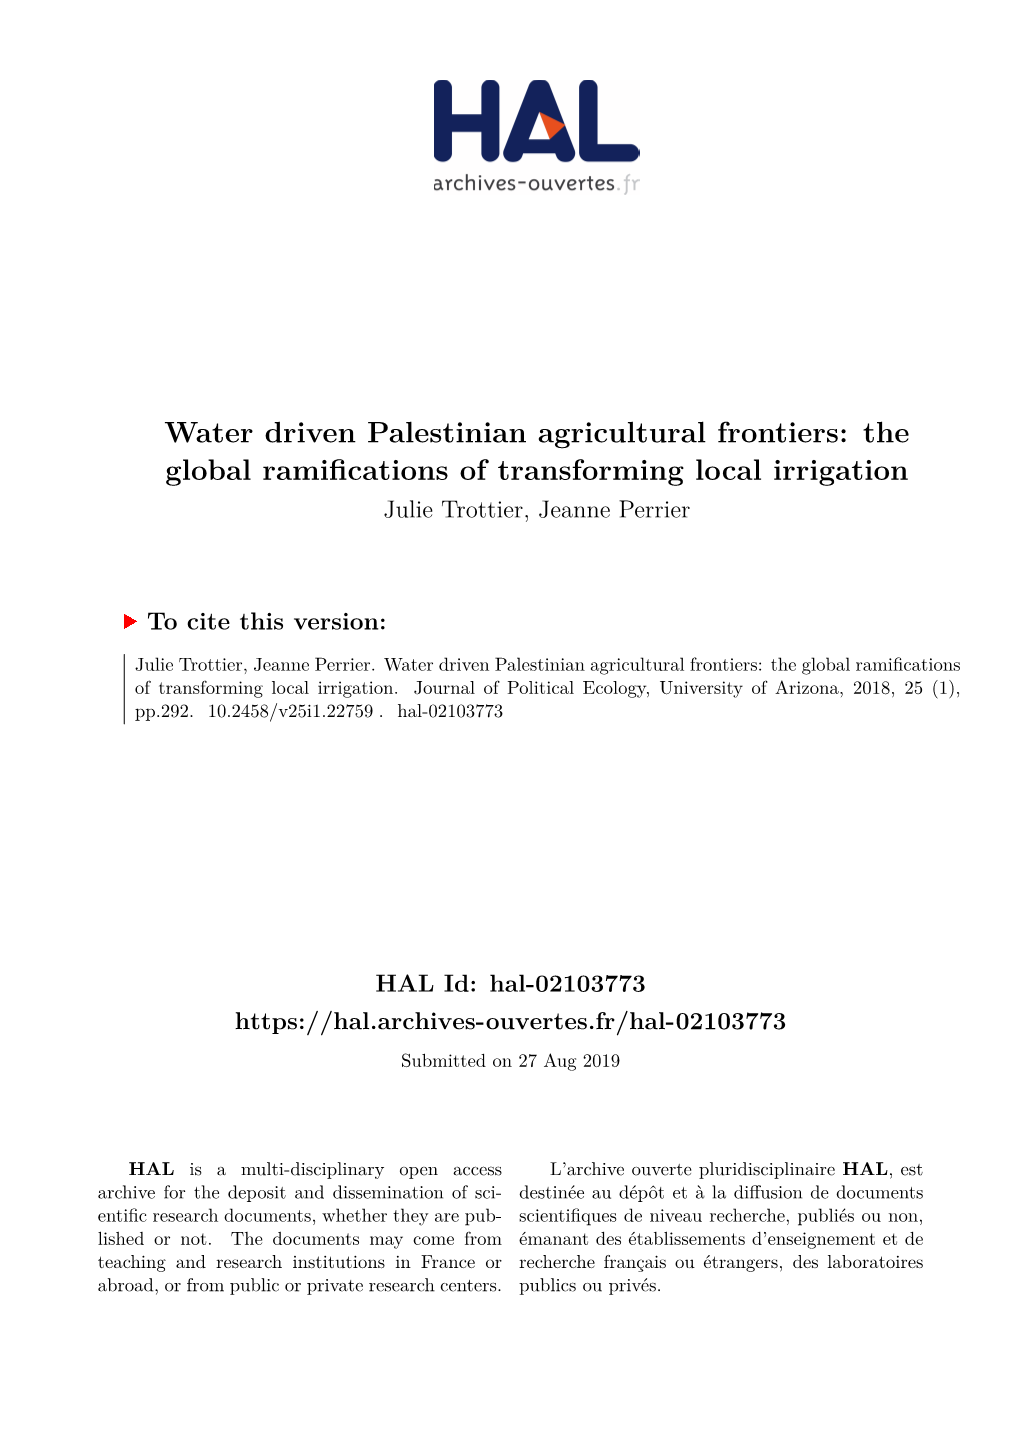 Water Driven Palestinian Agricultural Frontiers: the Global Ramifications of Transforming Local Irrigation Julie Trottier, Jeanne Perrier